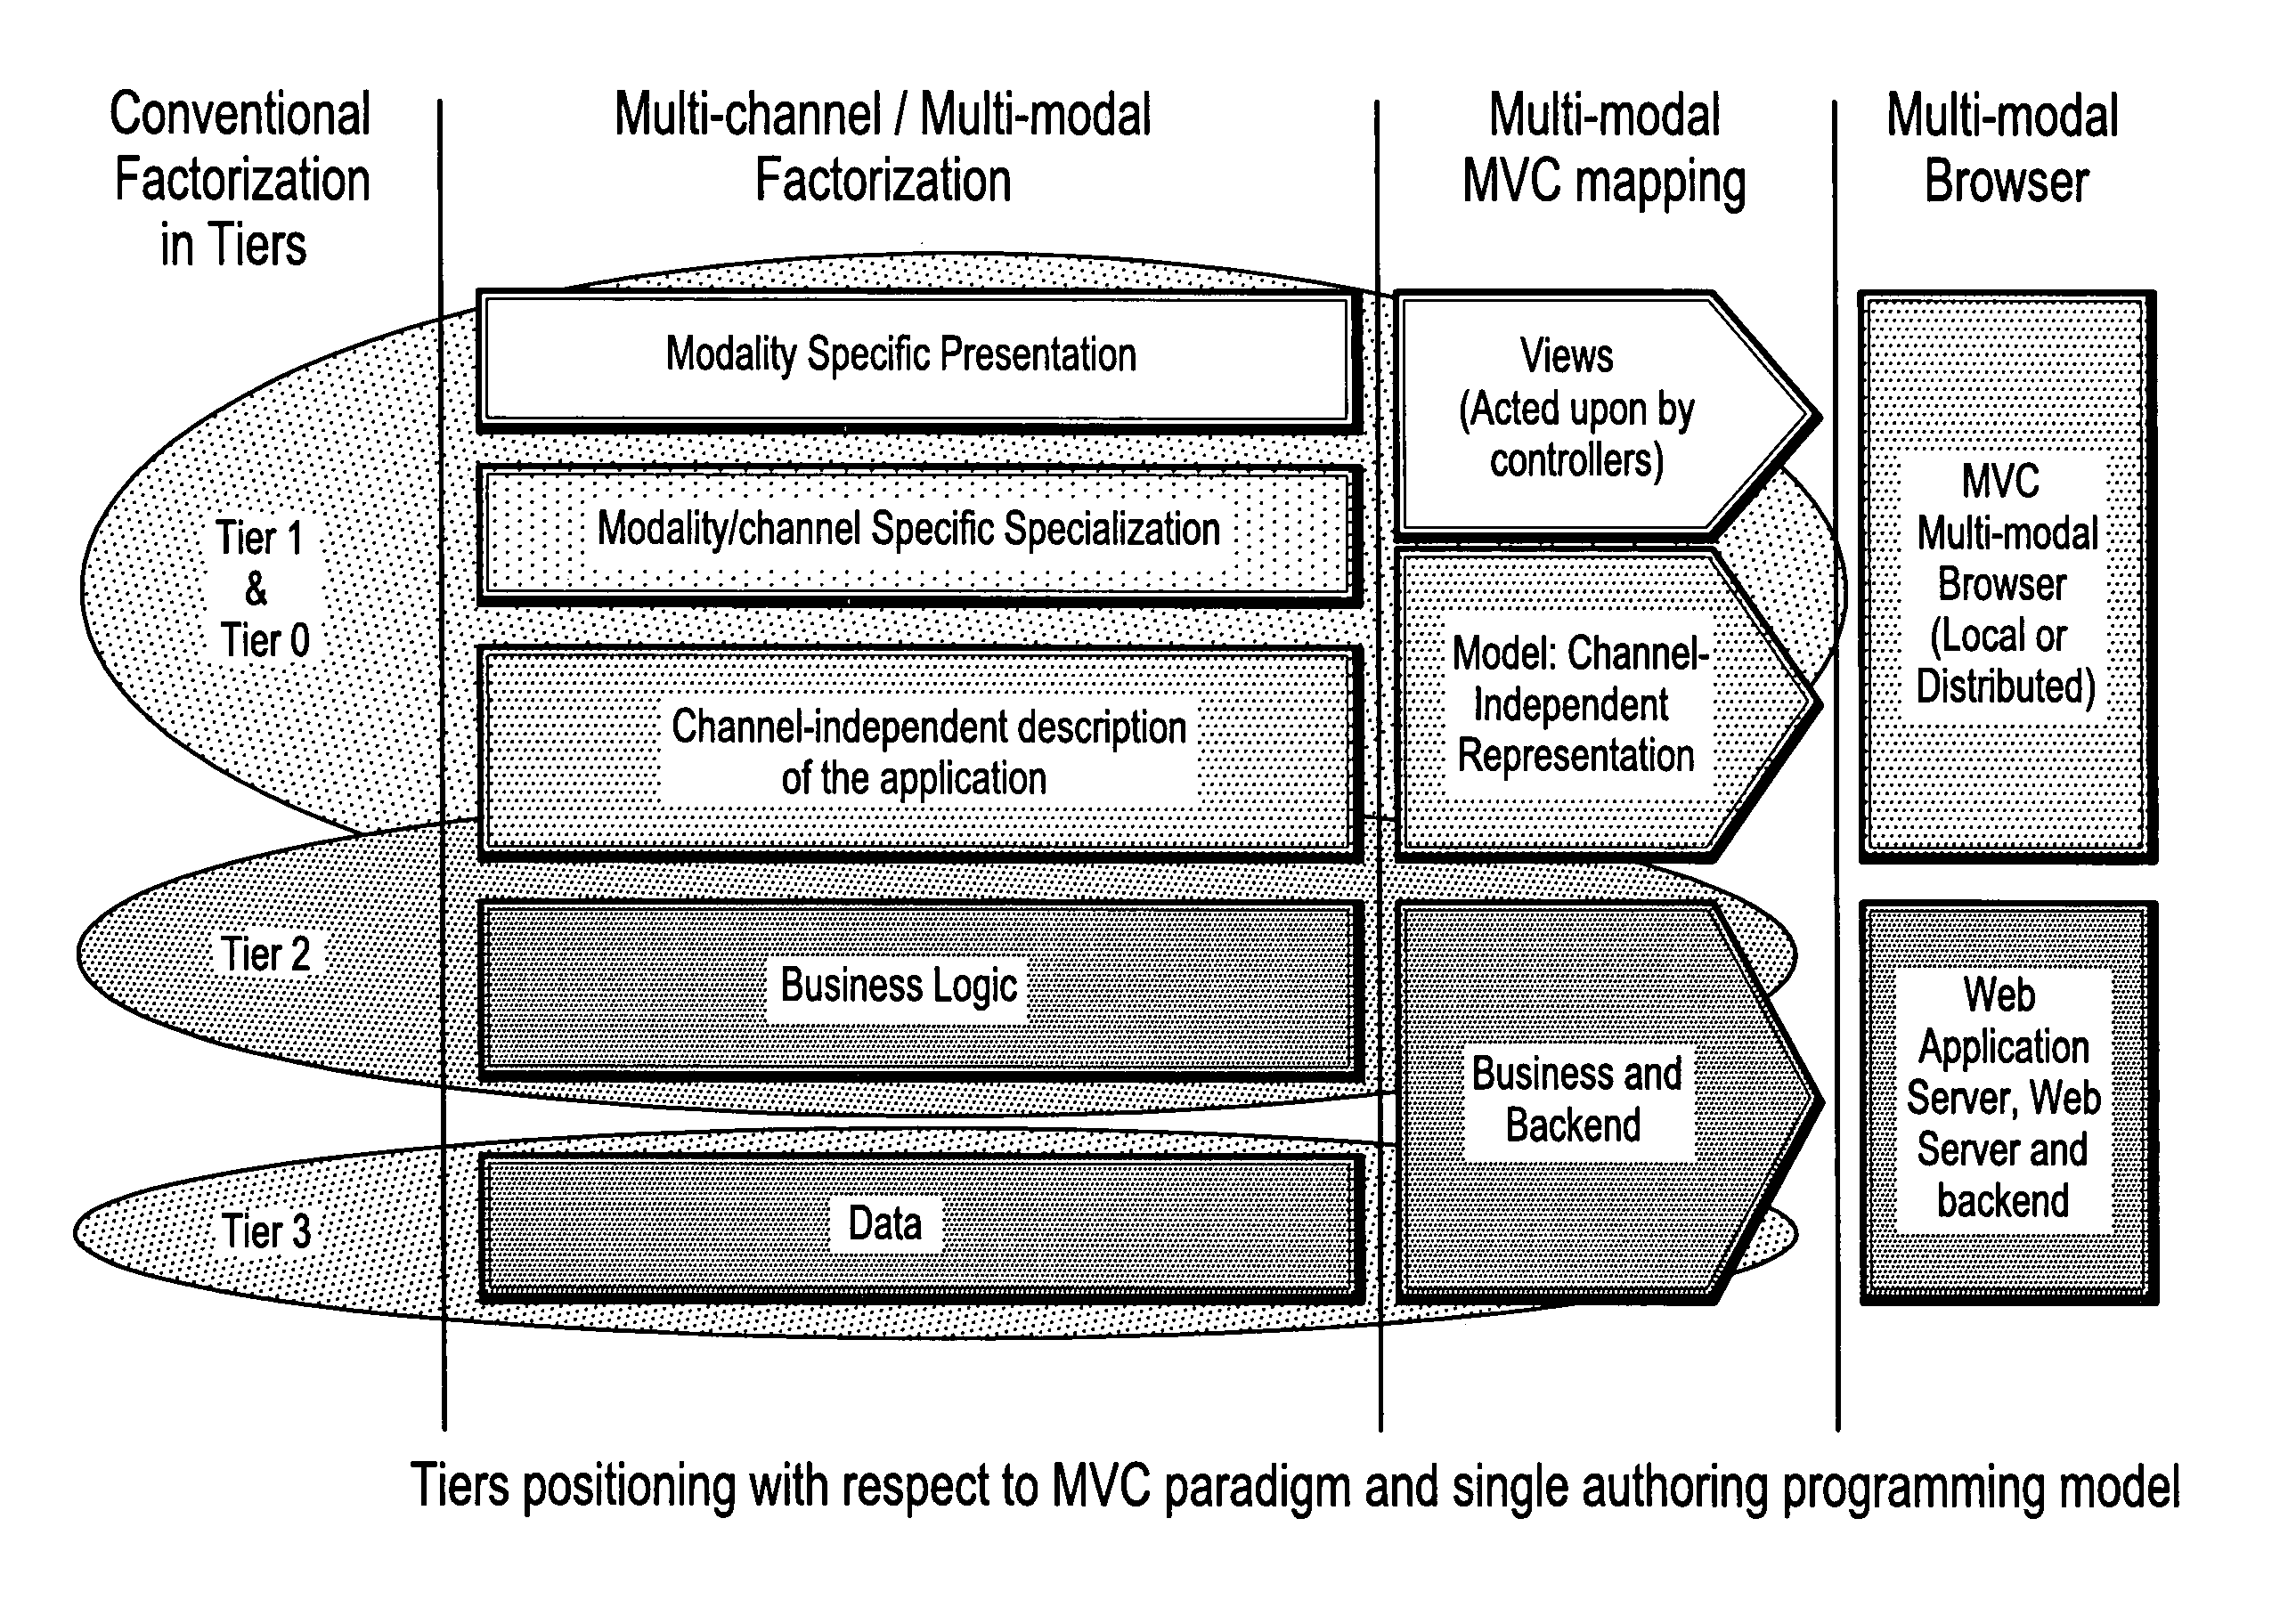 MVC (model-view-controller) based multi-modal authoring tool and development environment